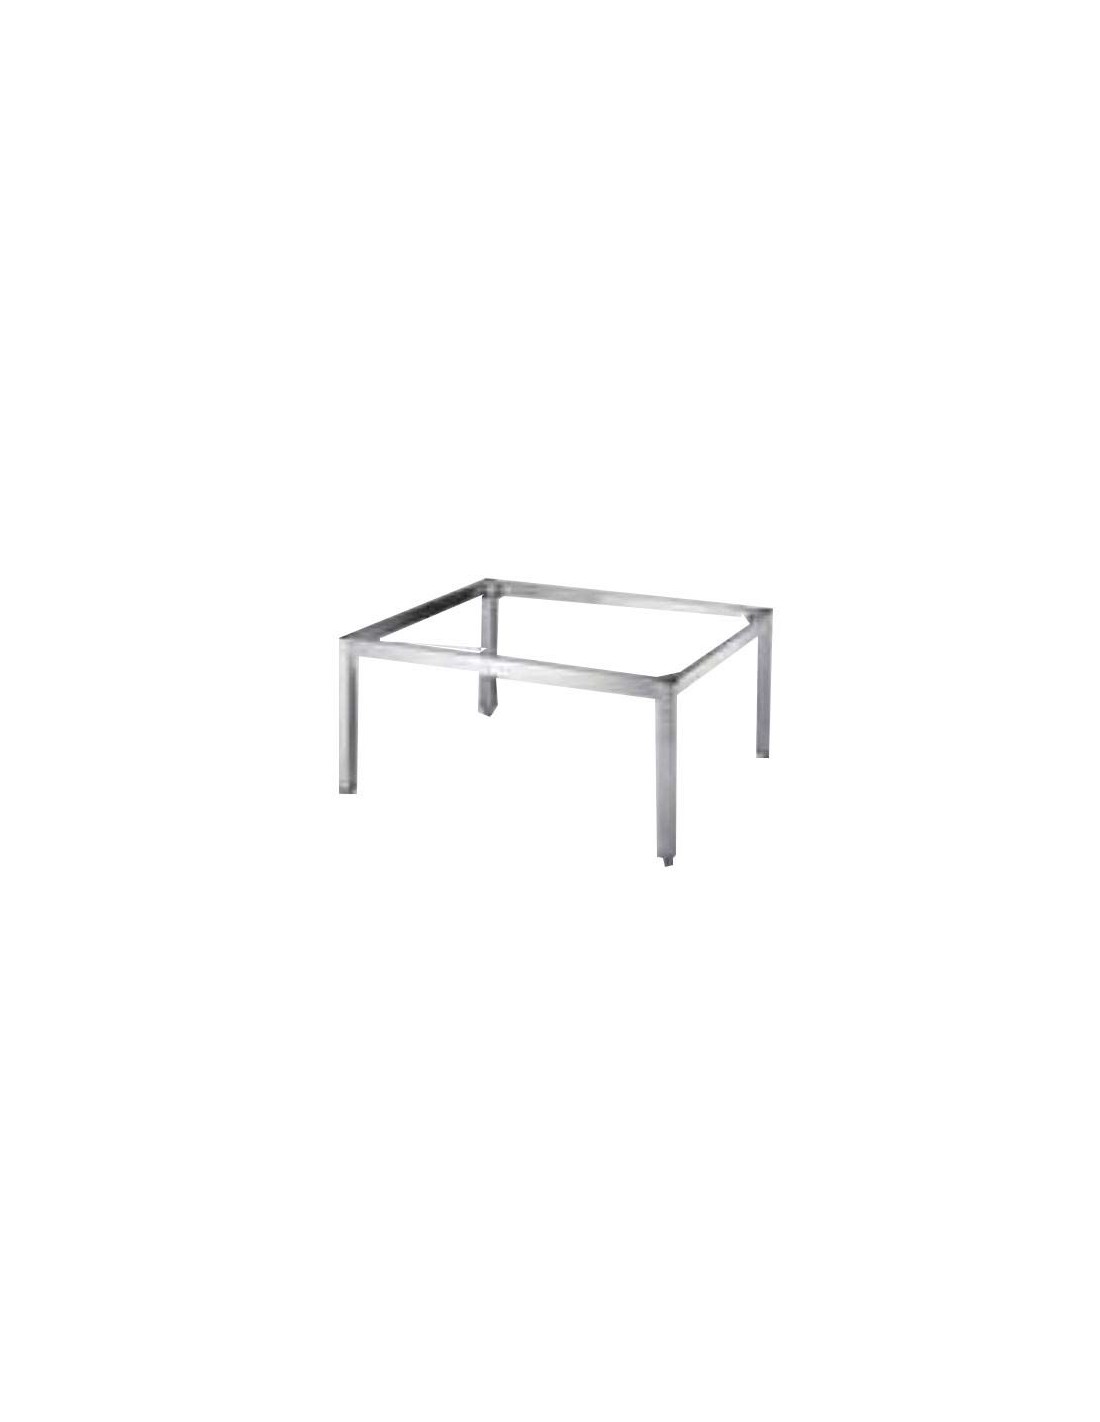 Gourmet GN1/1 superimposed stainless steel stand - Height cm 28